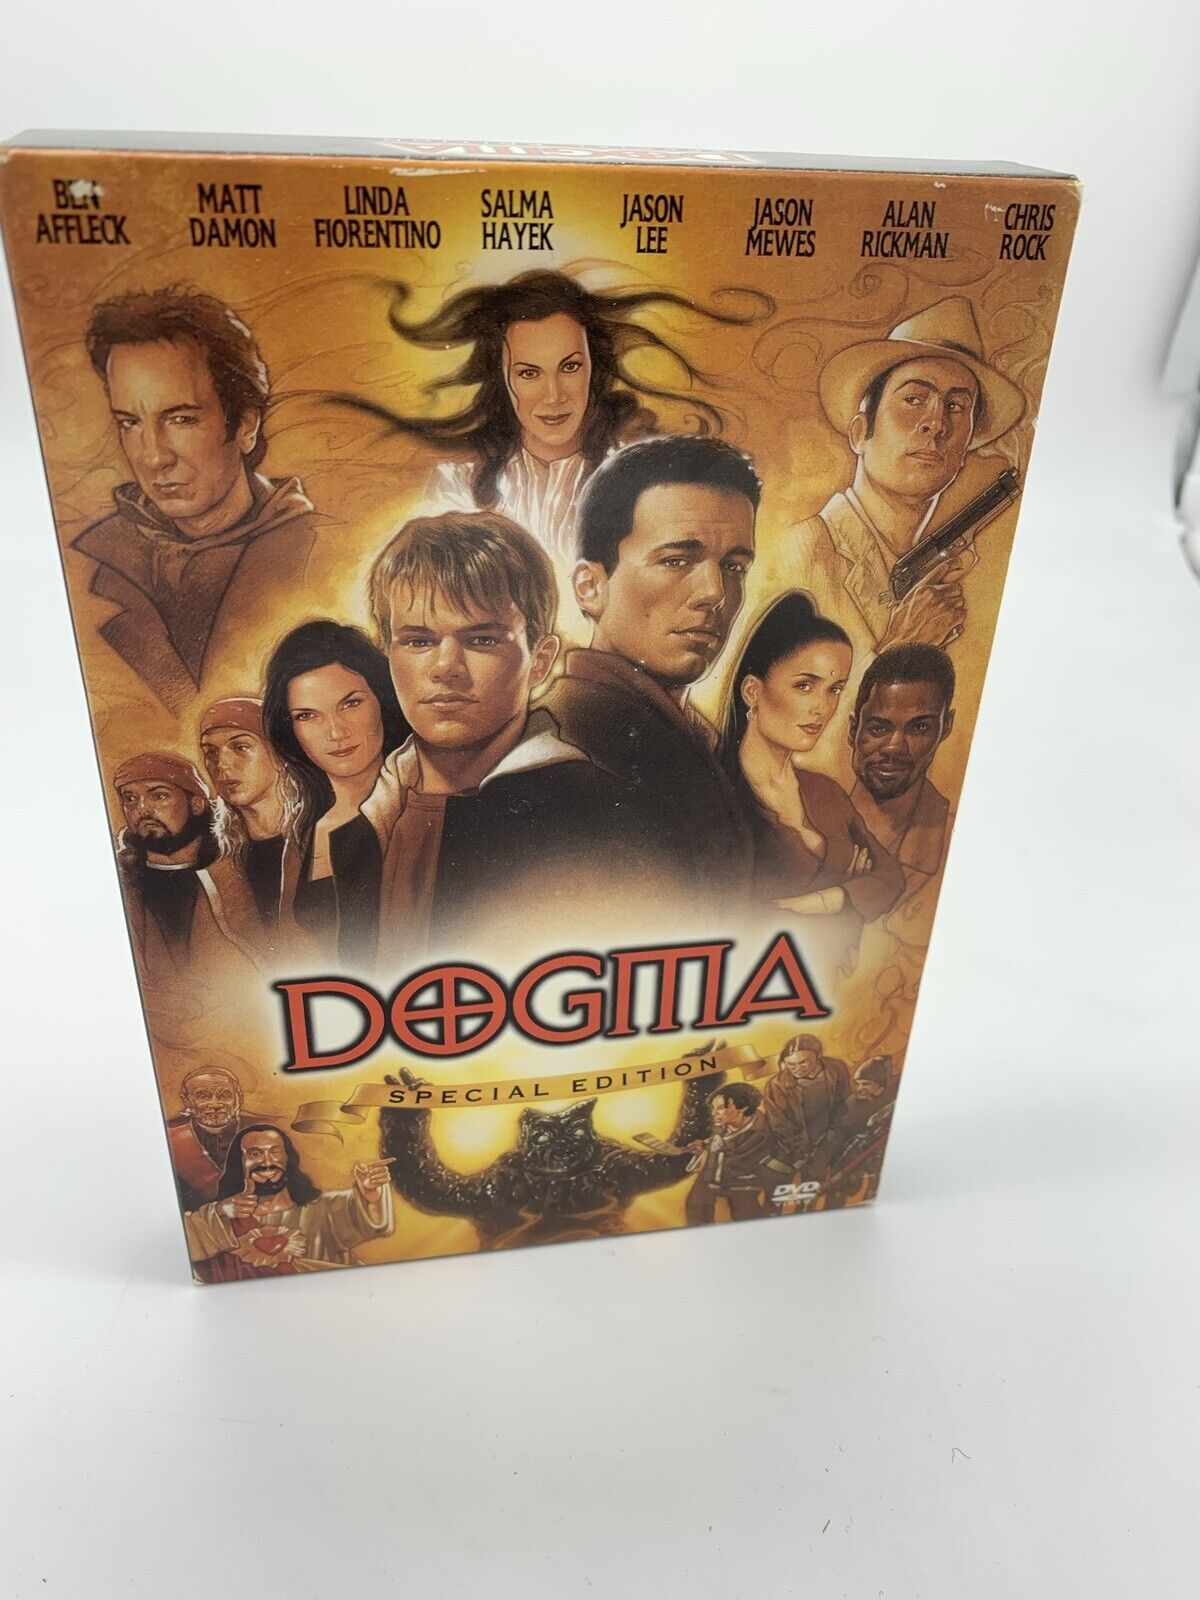 Dogma (DVD, 2001, 2-Disc Set, Special Edition)